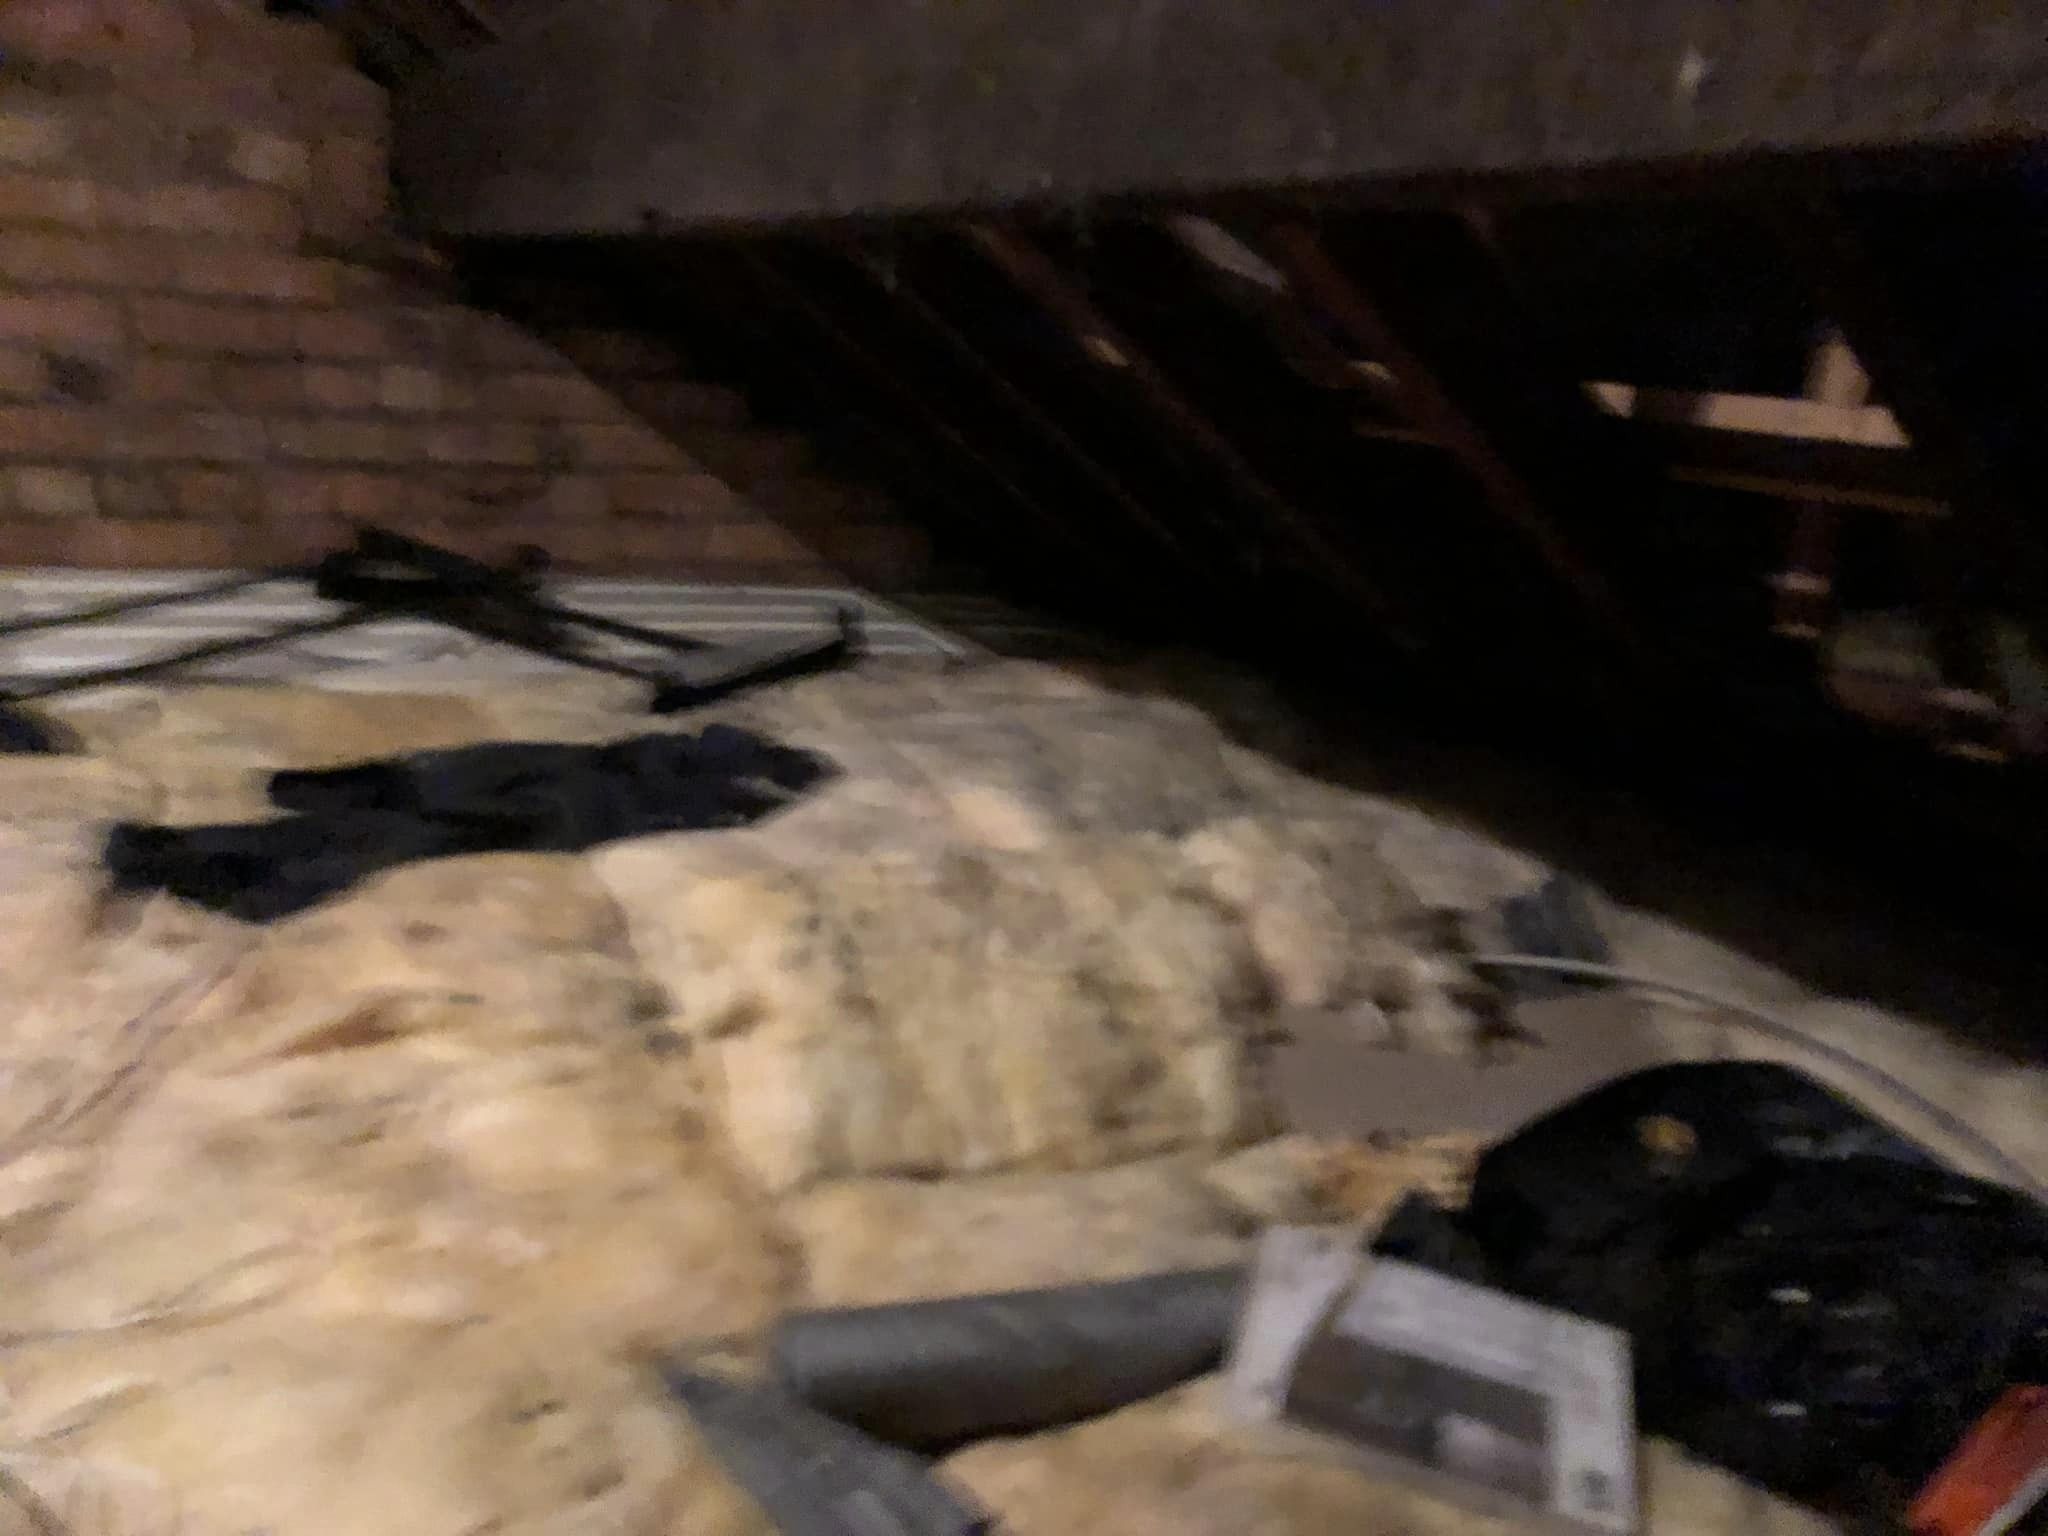 Loft Insulation Removal & Disposal Before & After Photos